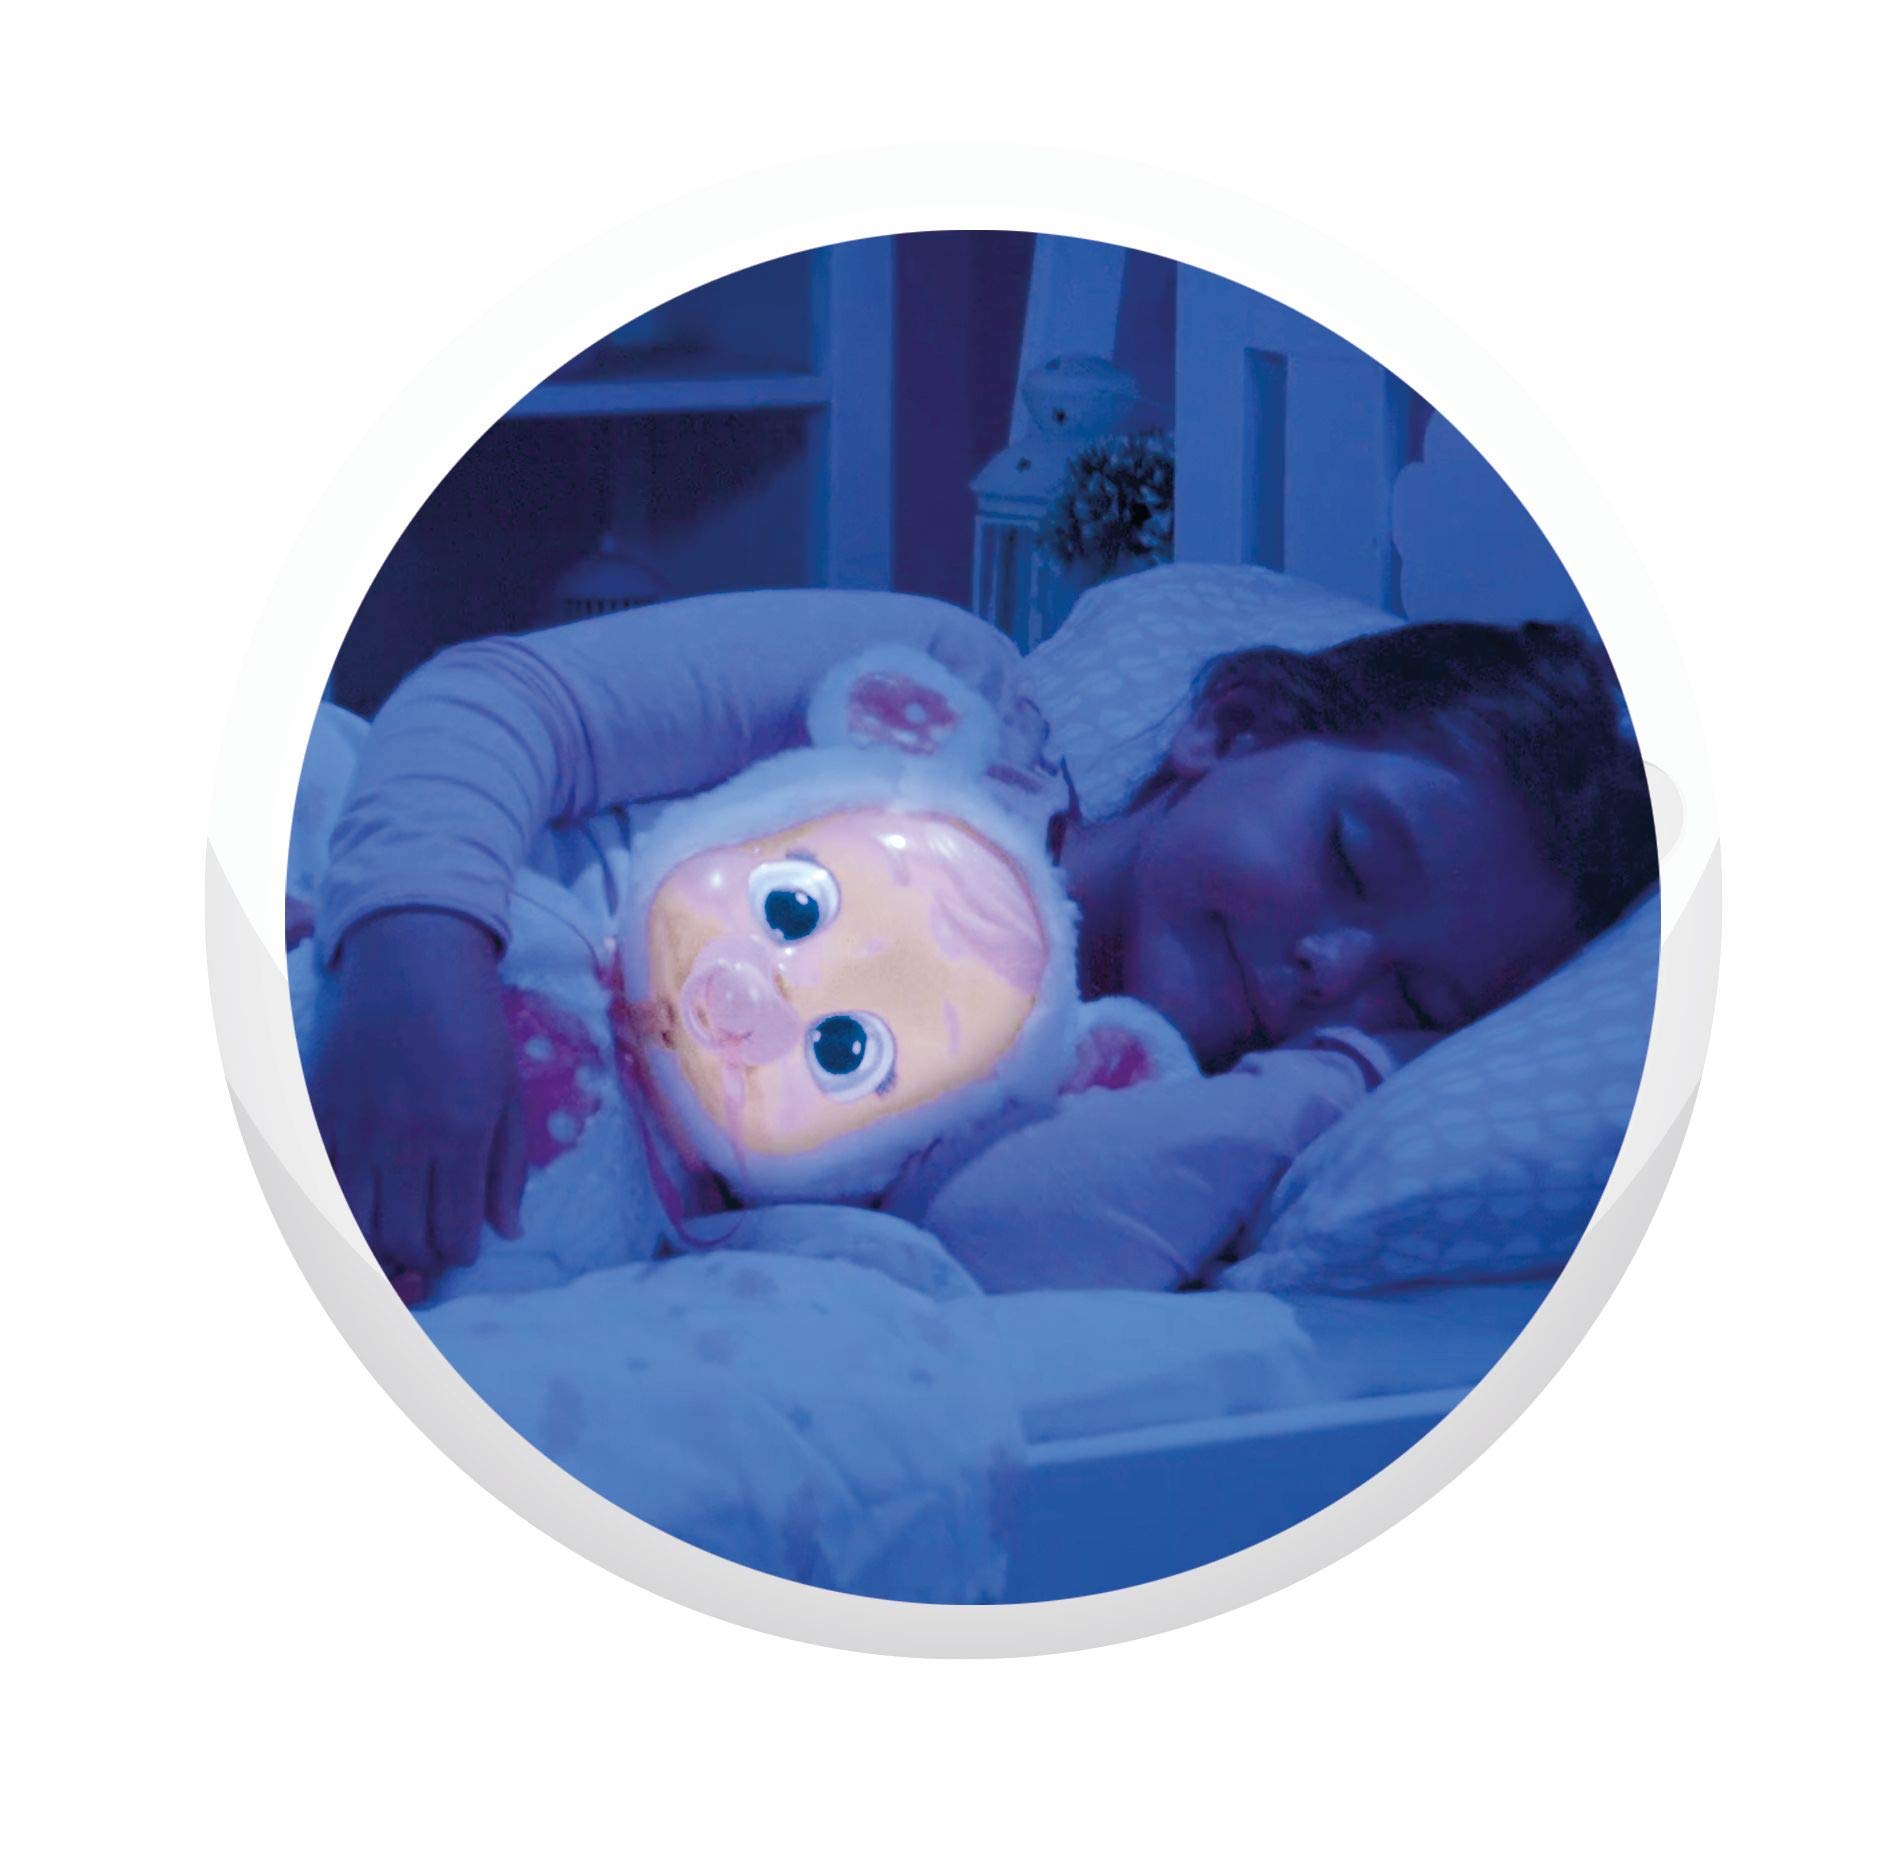 Cry Babies Goodnight Coney - Sleepy Time Baby Doll with LED Lights